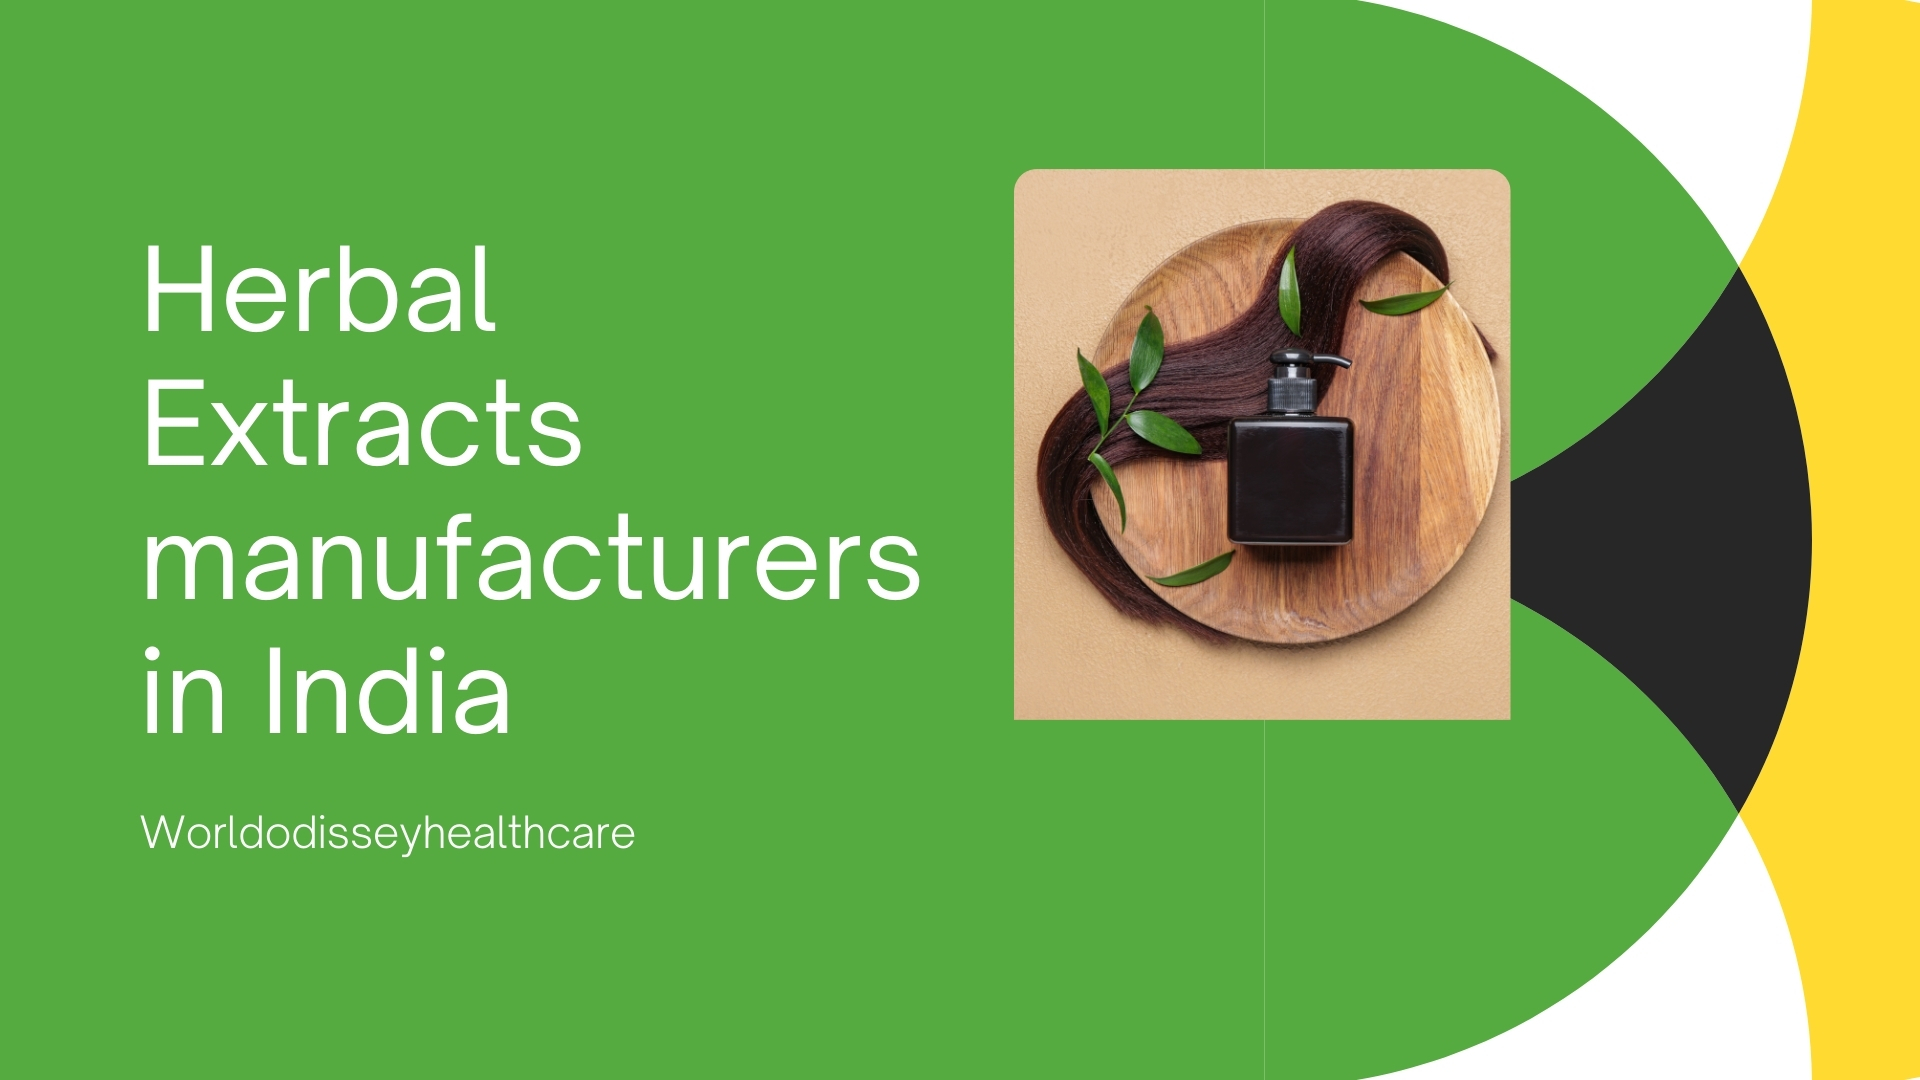 Herbal extracts manufacturers in Inida